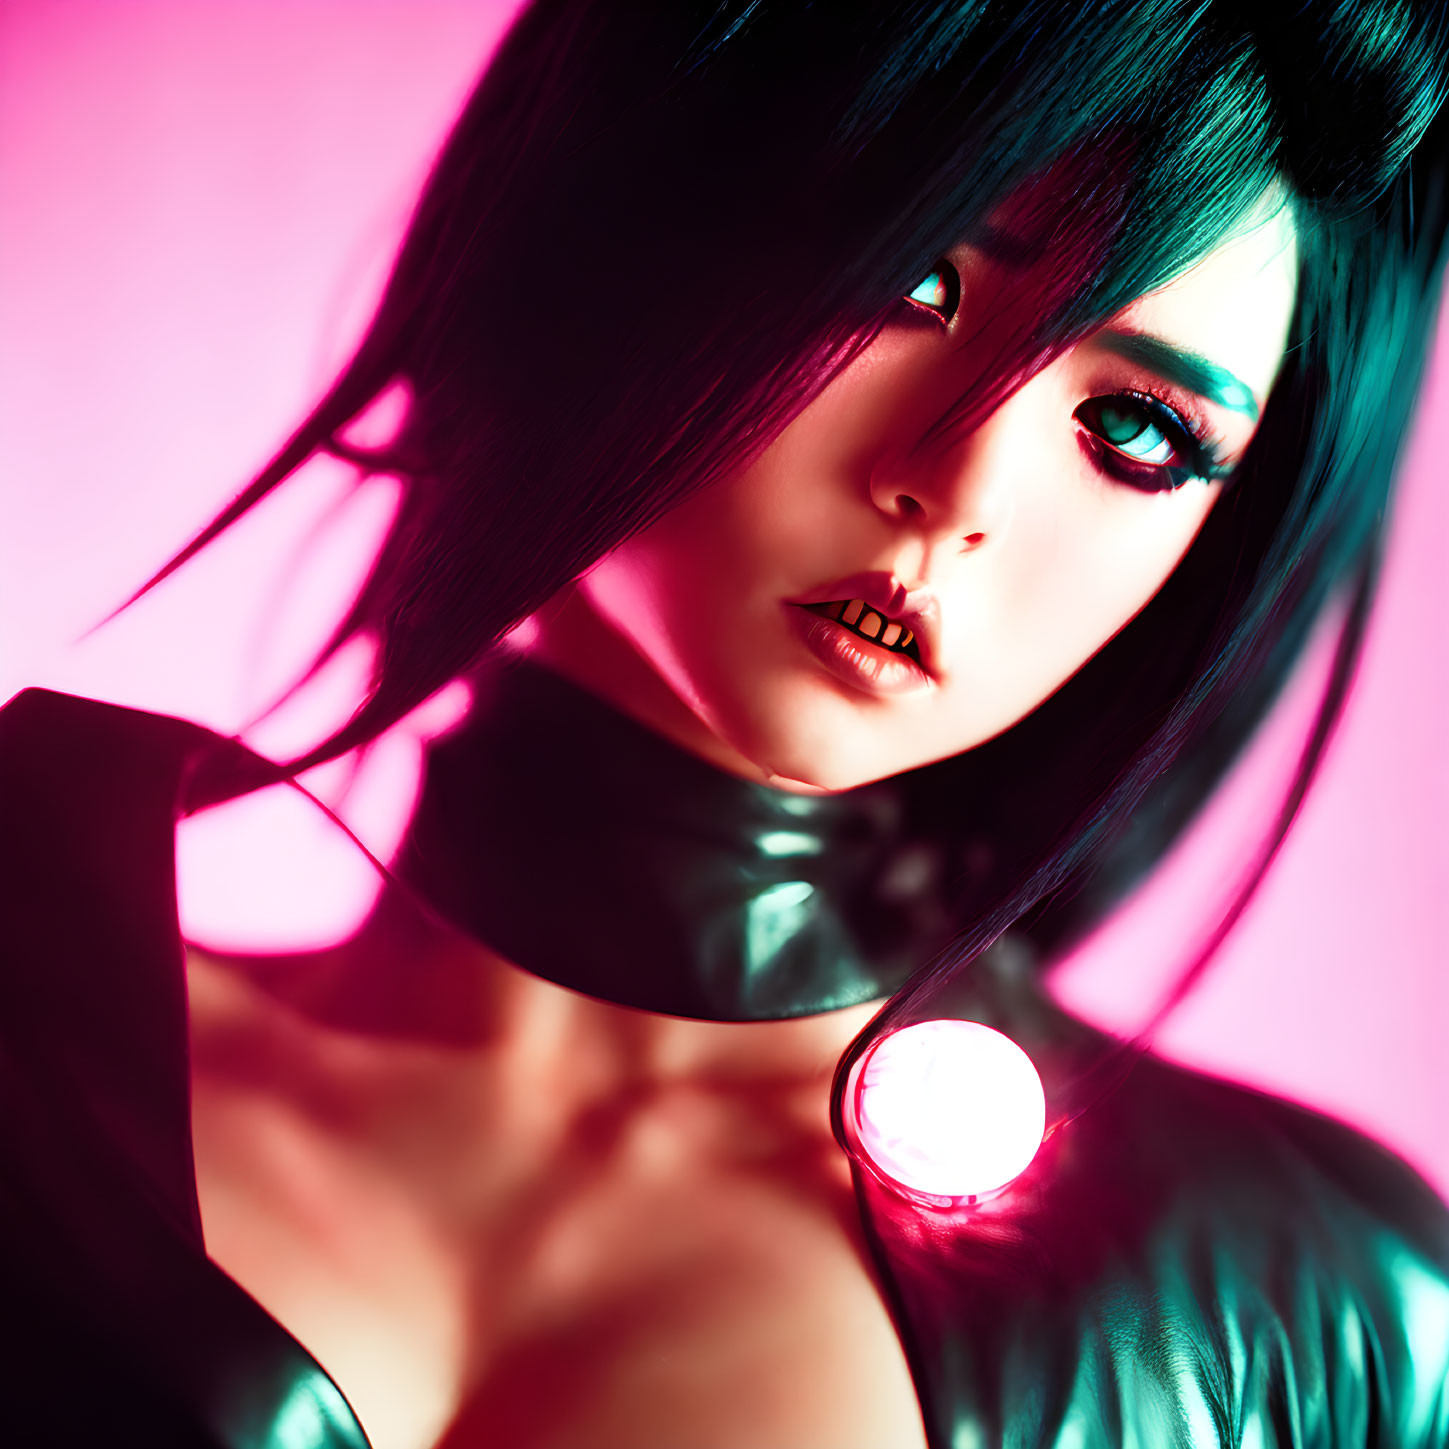 Portrait of female character with blue eyes, dark hair, and futuristic choker under pink and red lighting